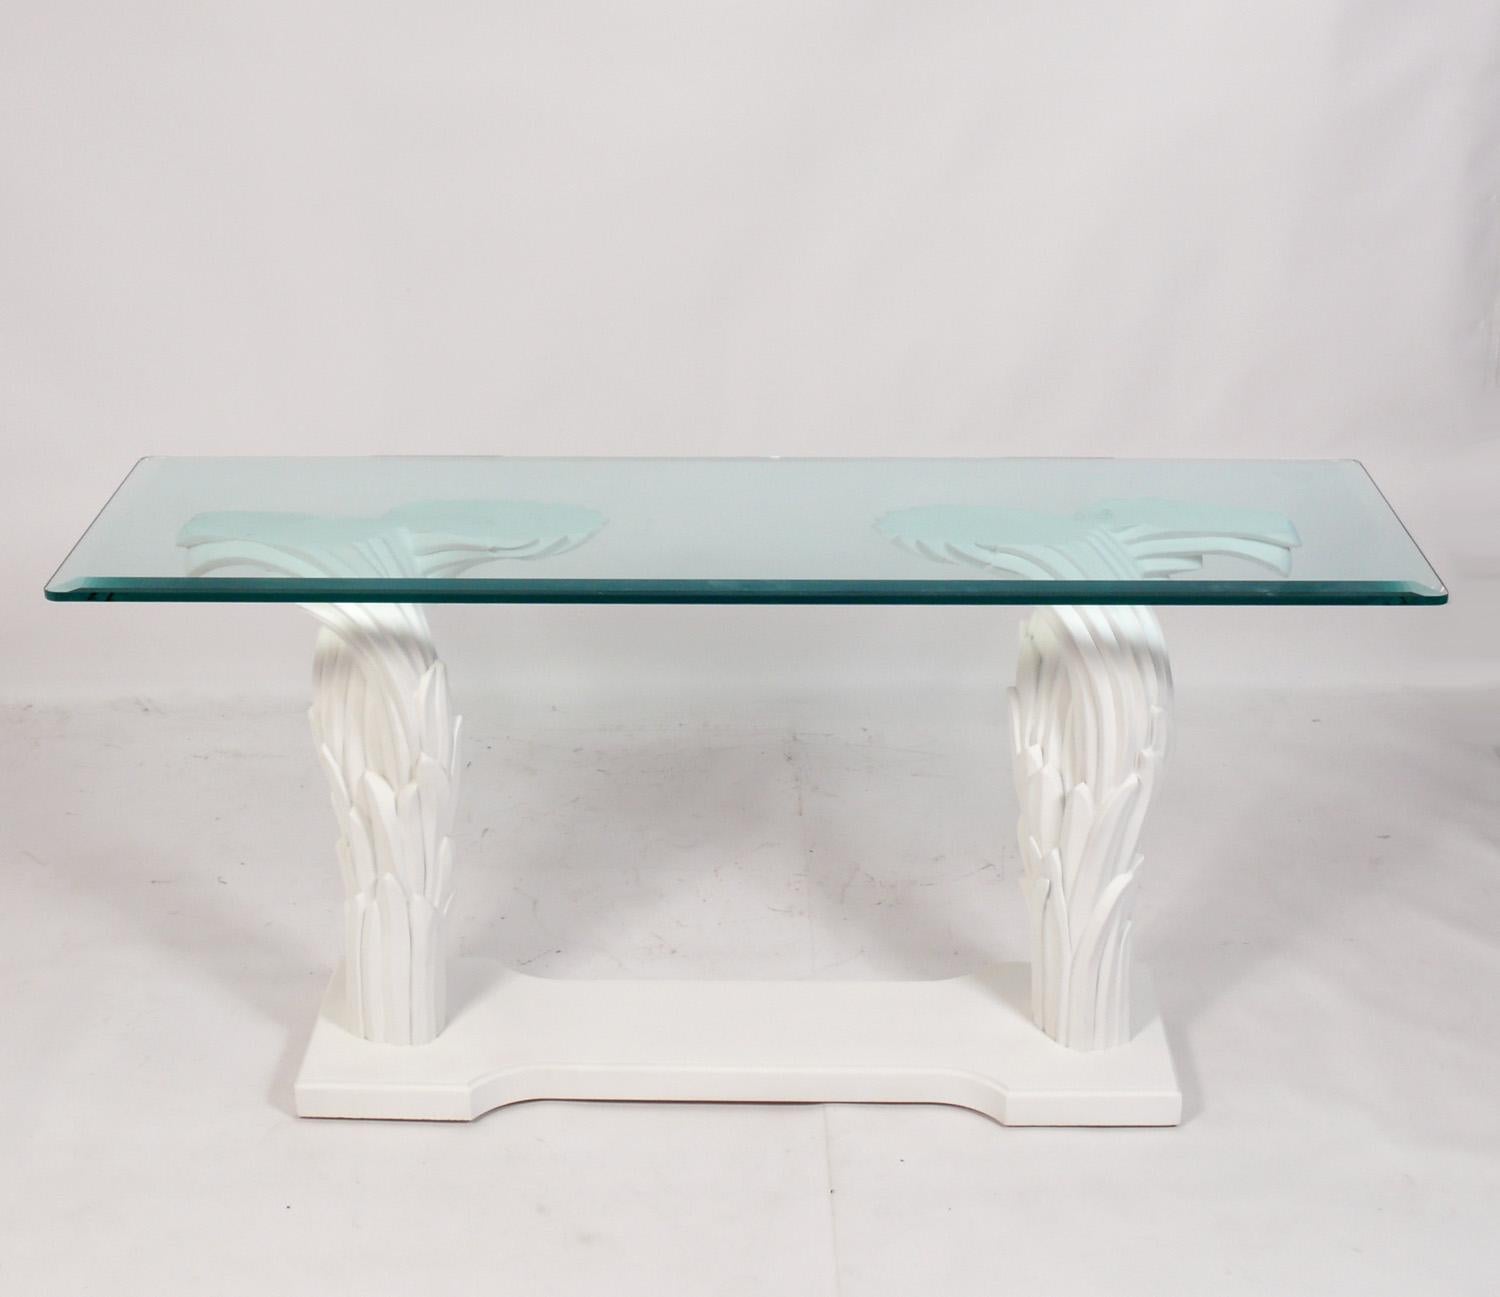 Elegant white plaster console table, in the manner of Serge Roche, probably American, circa 1960s. This piece is a versatile size and can be used as a console table, bar, or media center.